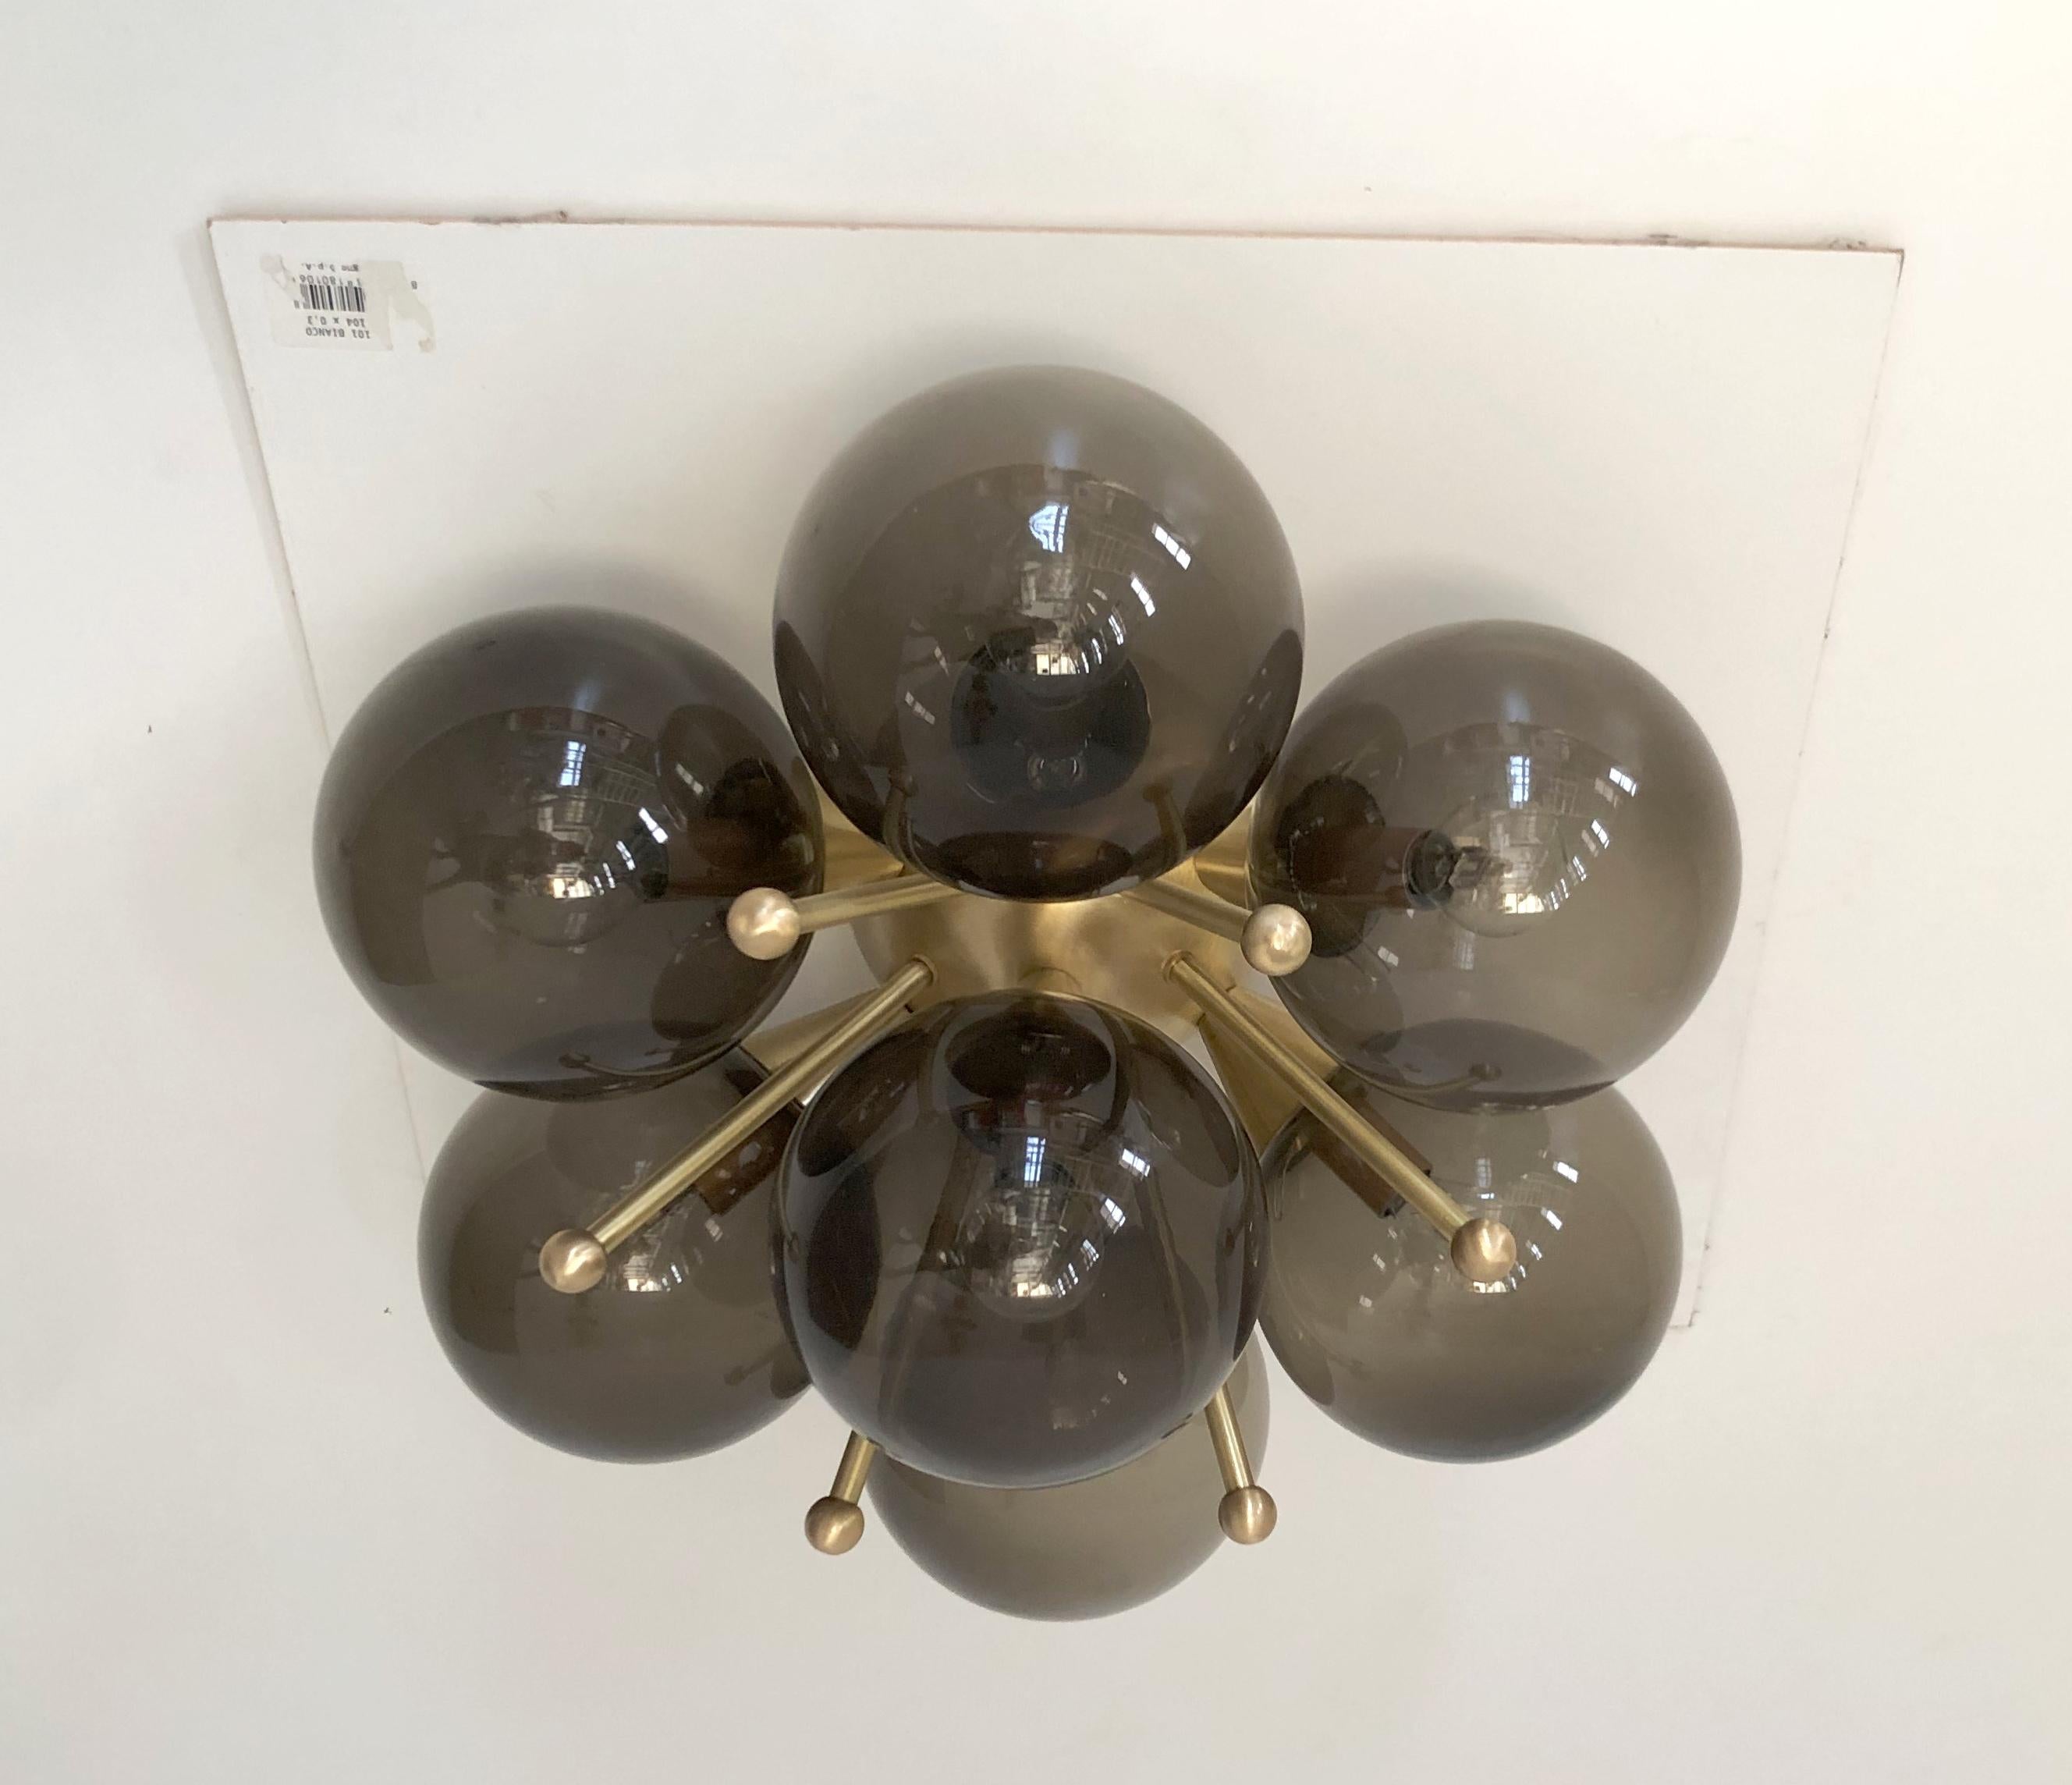 Italian flush mount with murano glass globes mounted on solid brass frame.
Designed by Fabio Bergomi / made in Italy.
7 lights / E12 or E14 type / max 40W each.
Measures: diameter: 22 inches / height: 11 inches.
Order only / this item ships from